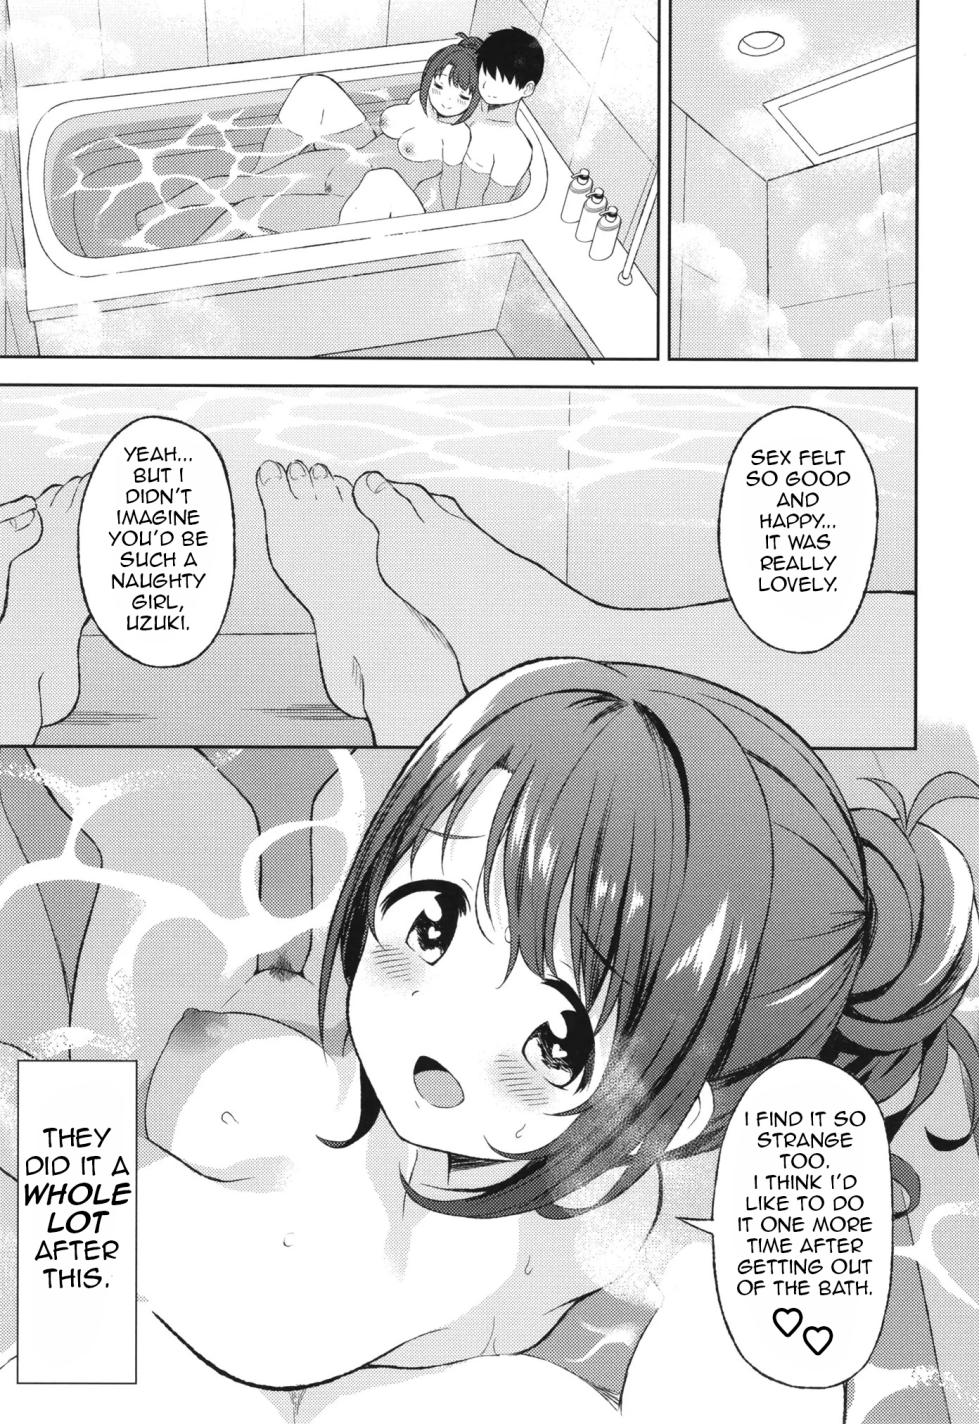 Hidding from the rain in a love hotel with Uzuki - Page 24